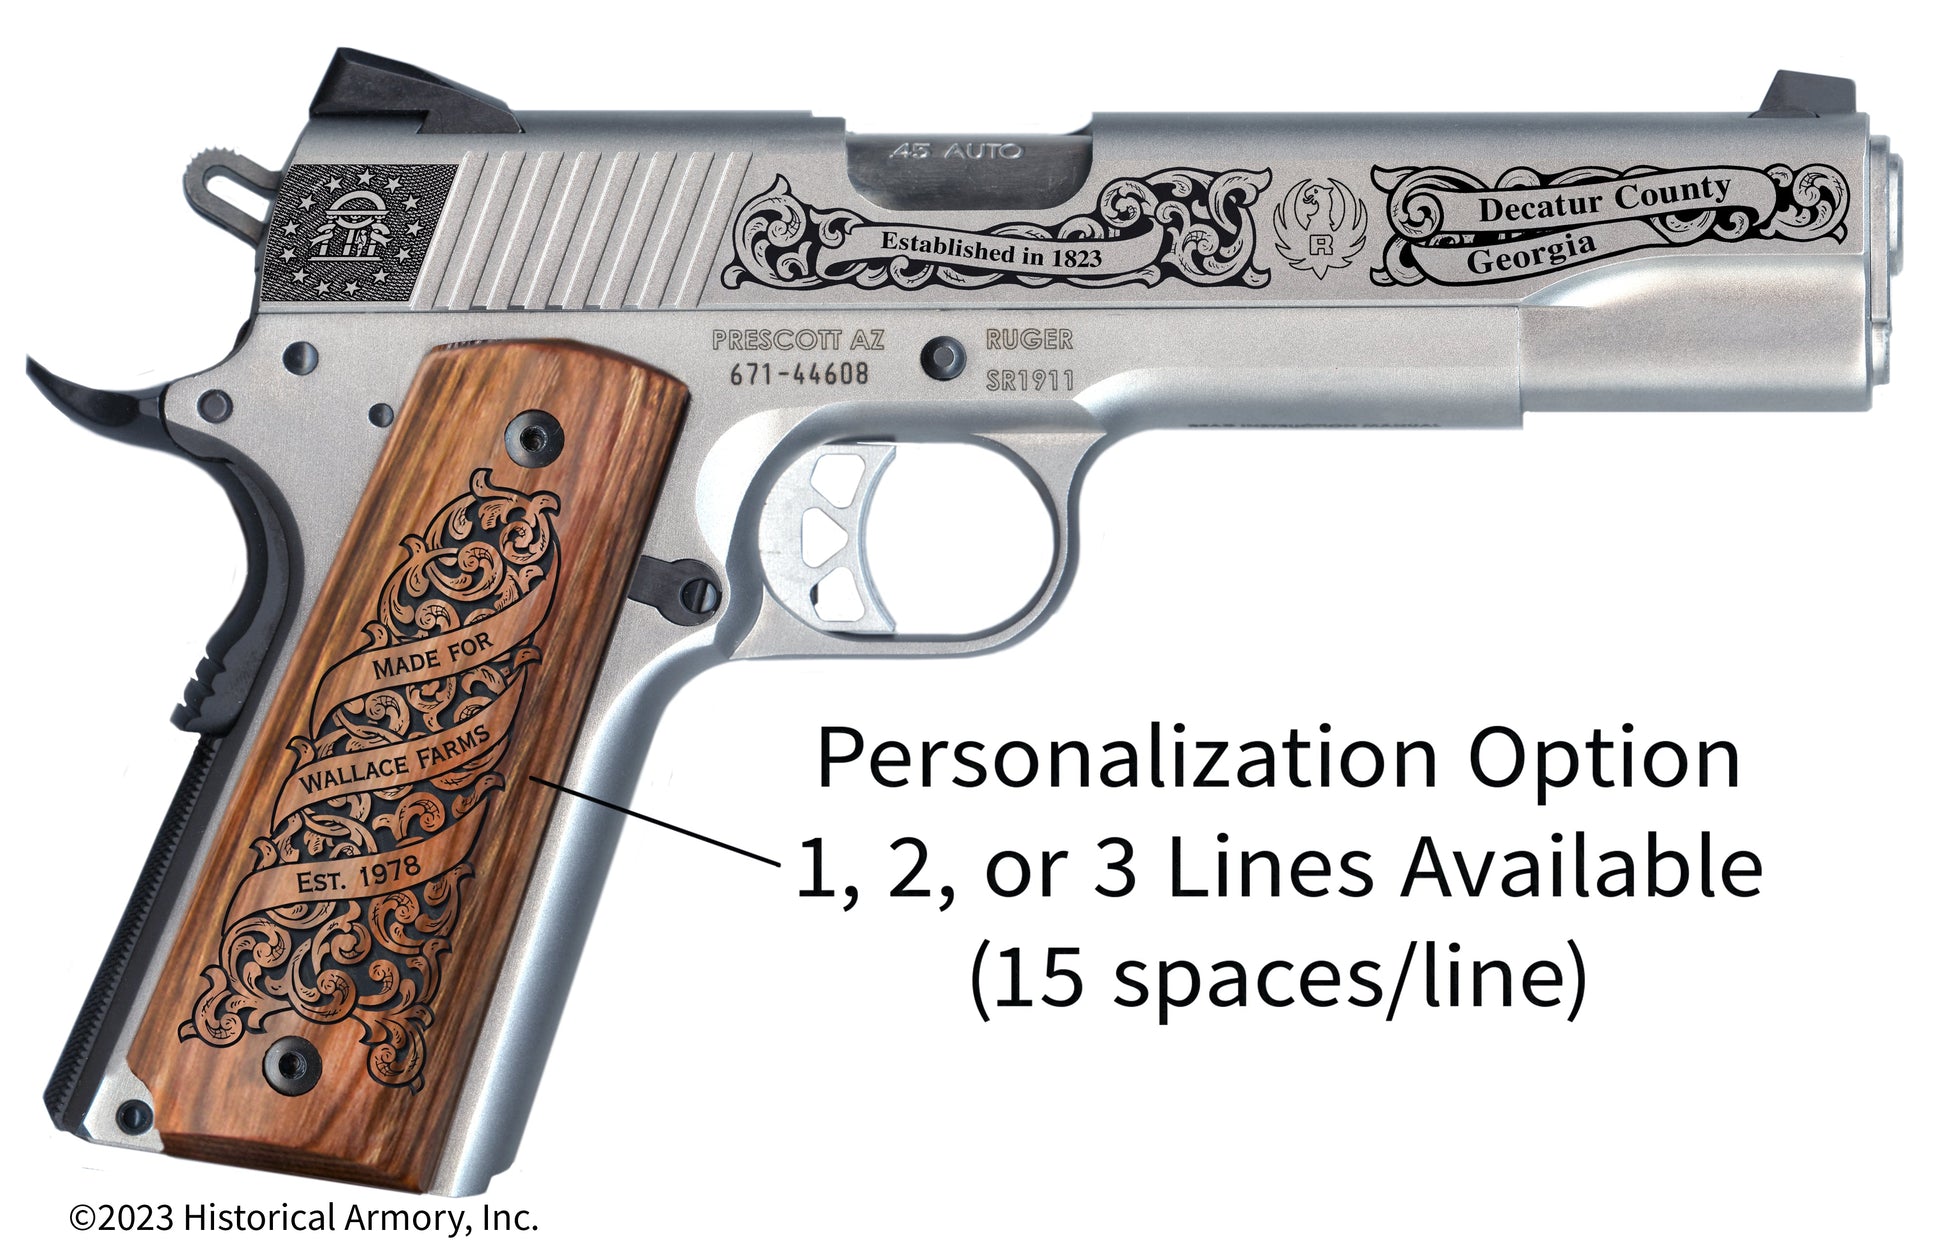 Decatur County Georgia Personalized Engraved .45 Auto Ruger 1911